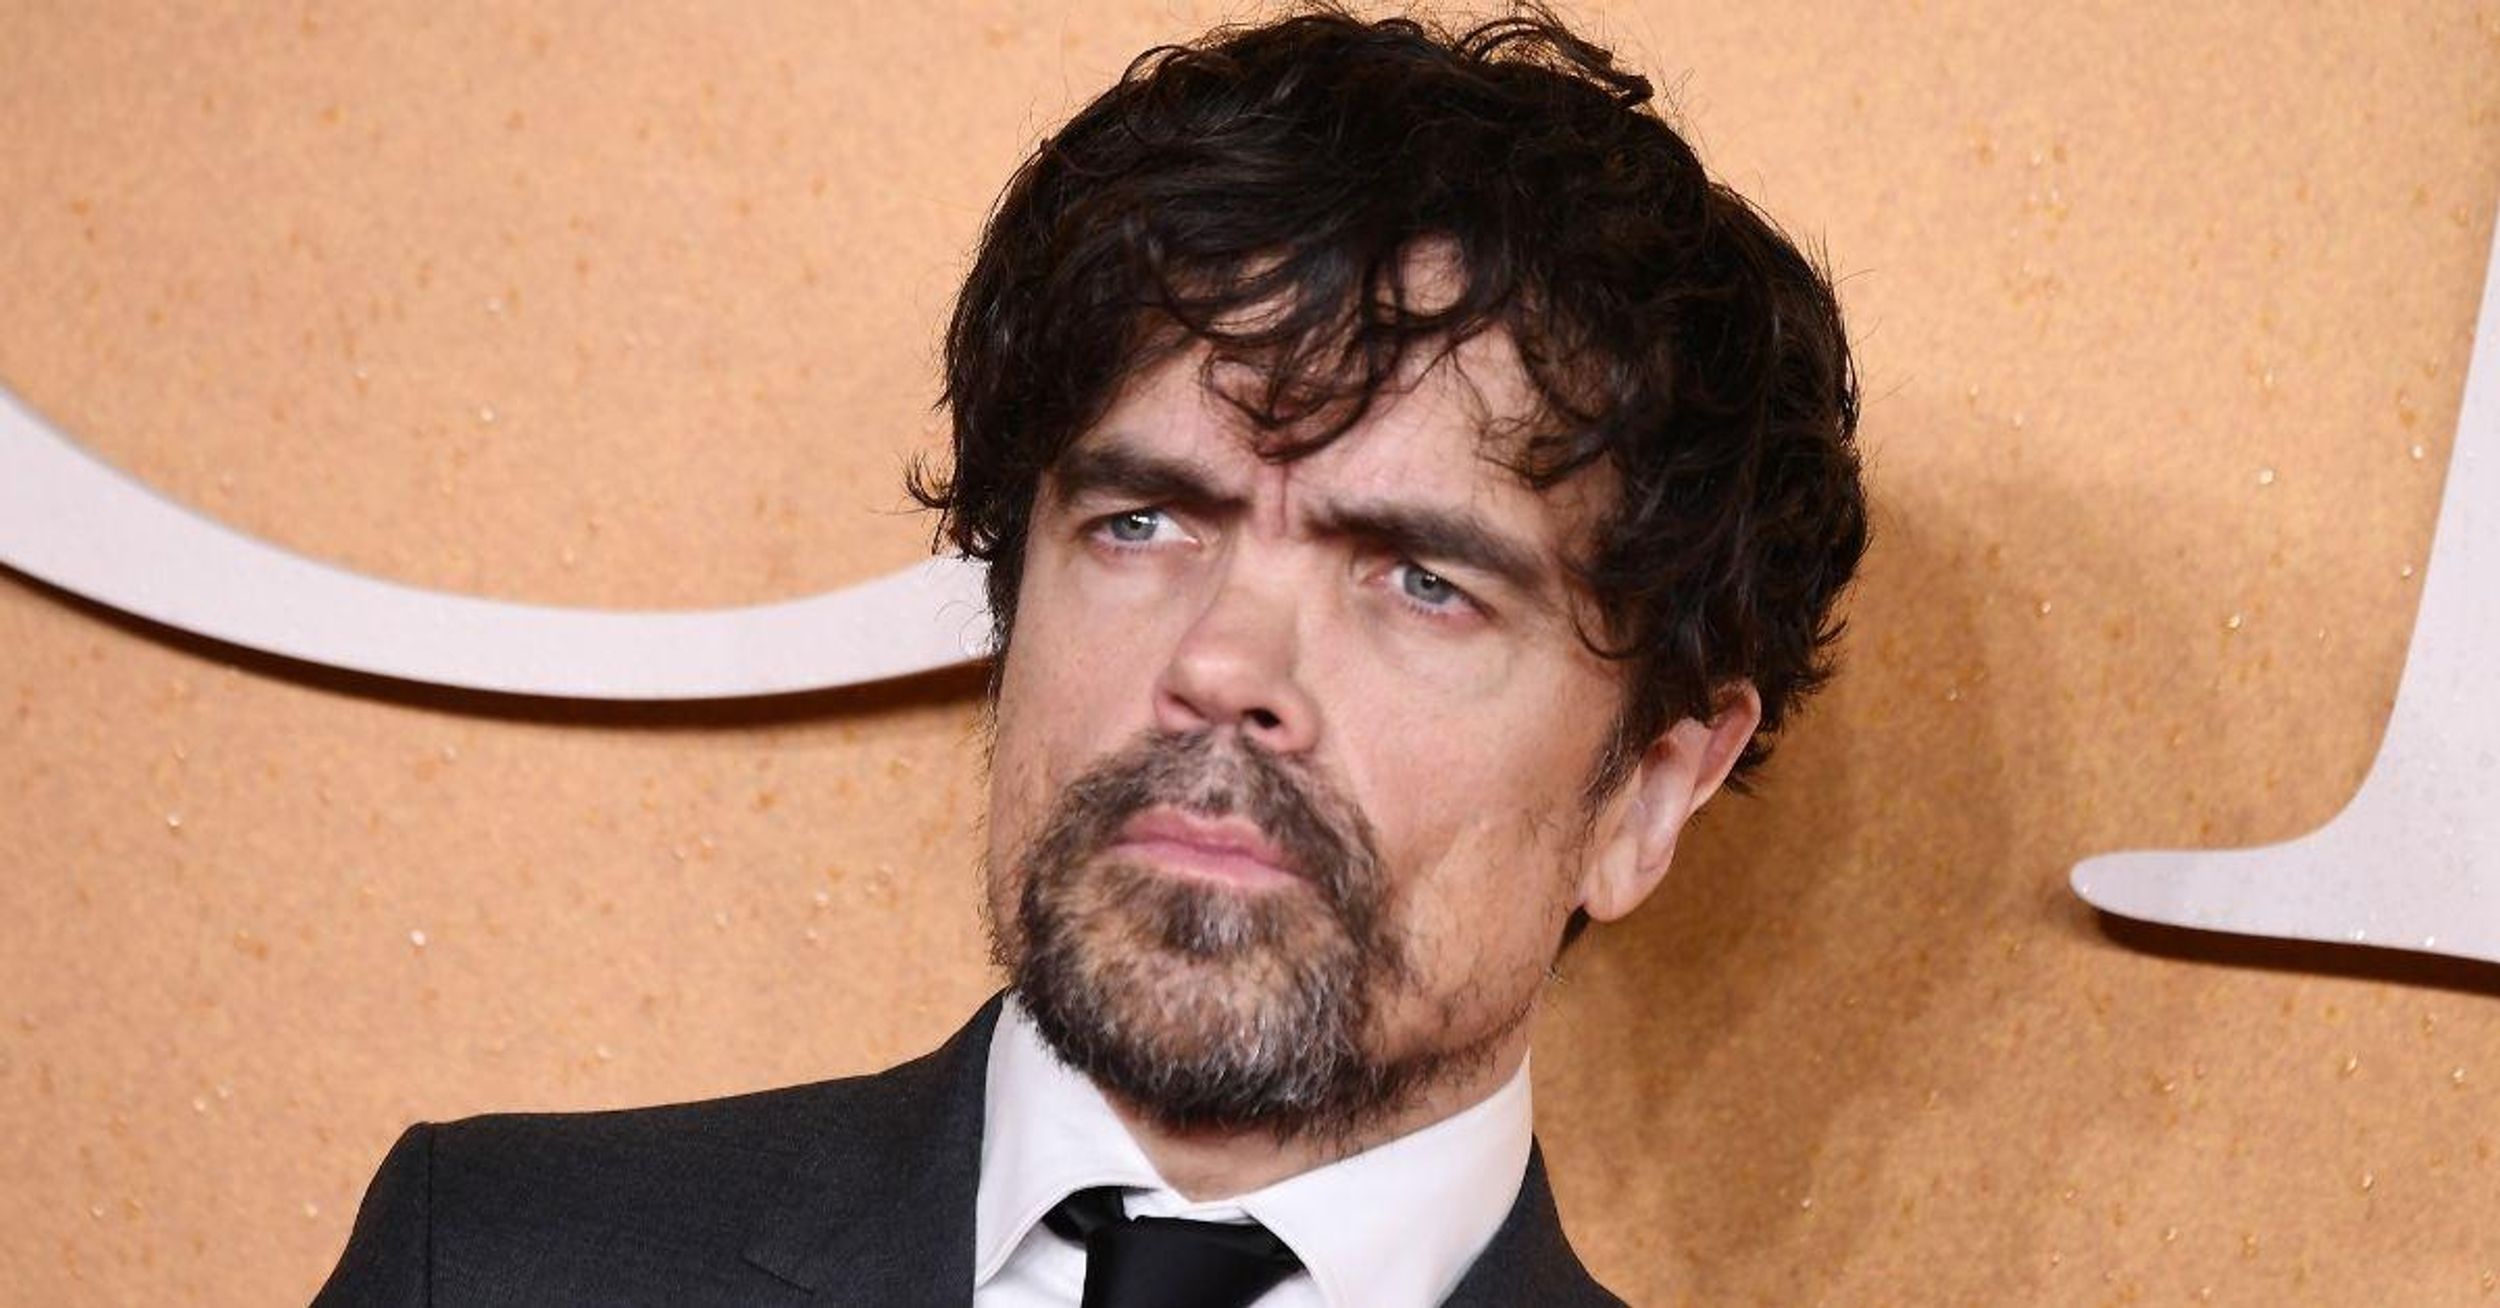 Peter Dinklage Rips Disney Over Upcoming 'Snow White' Live-Action Remake: 'What The F**K Are You Doing?'